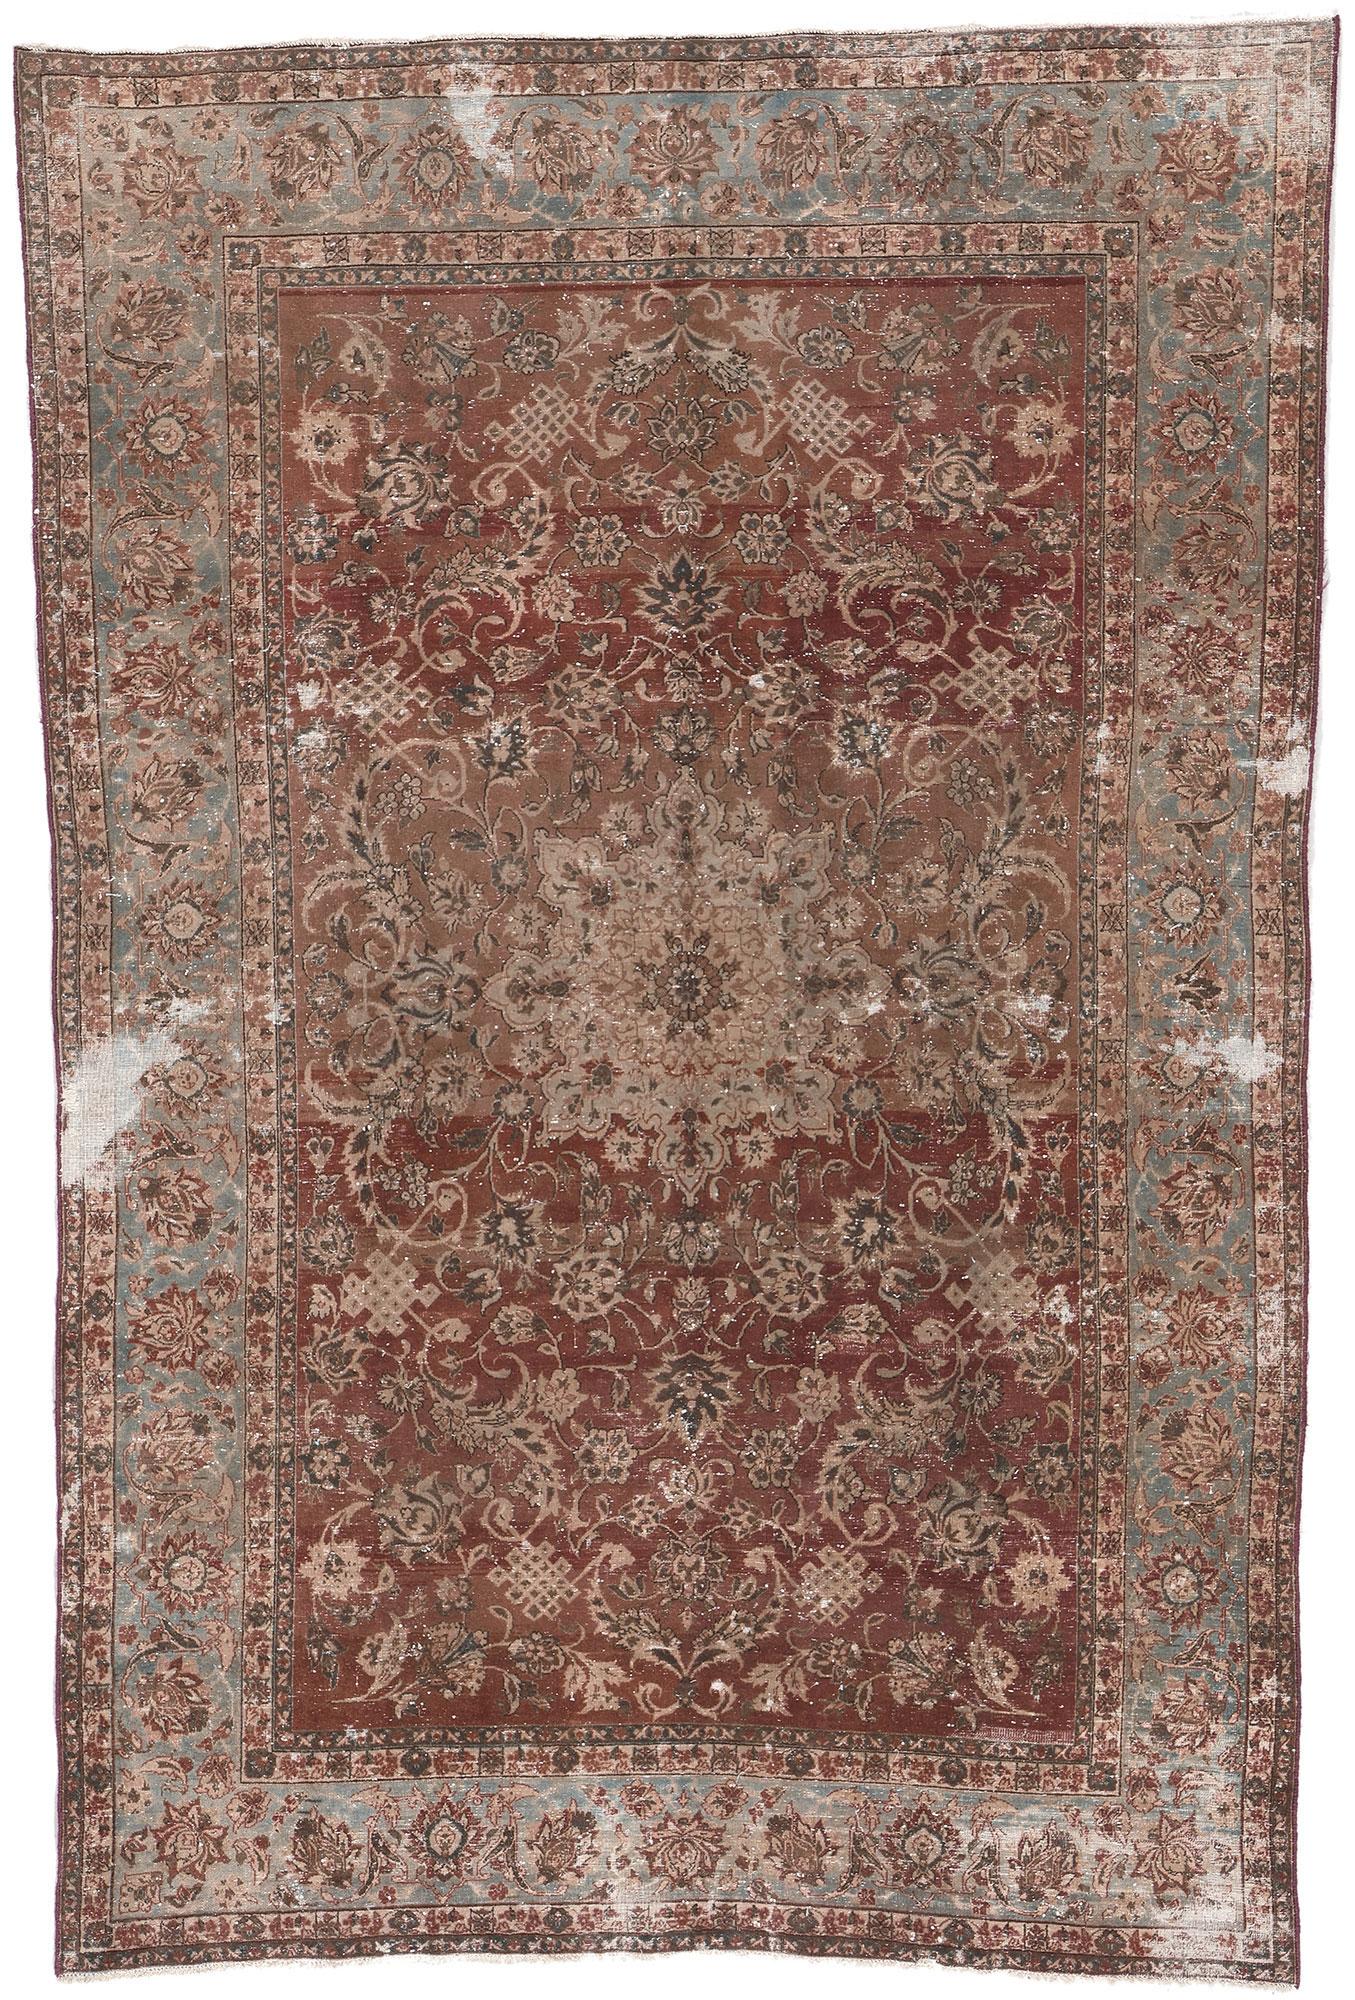 Distressed Antique Persian Tabriz Rug with Rustic Earth-Tone Colors For Sale 4